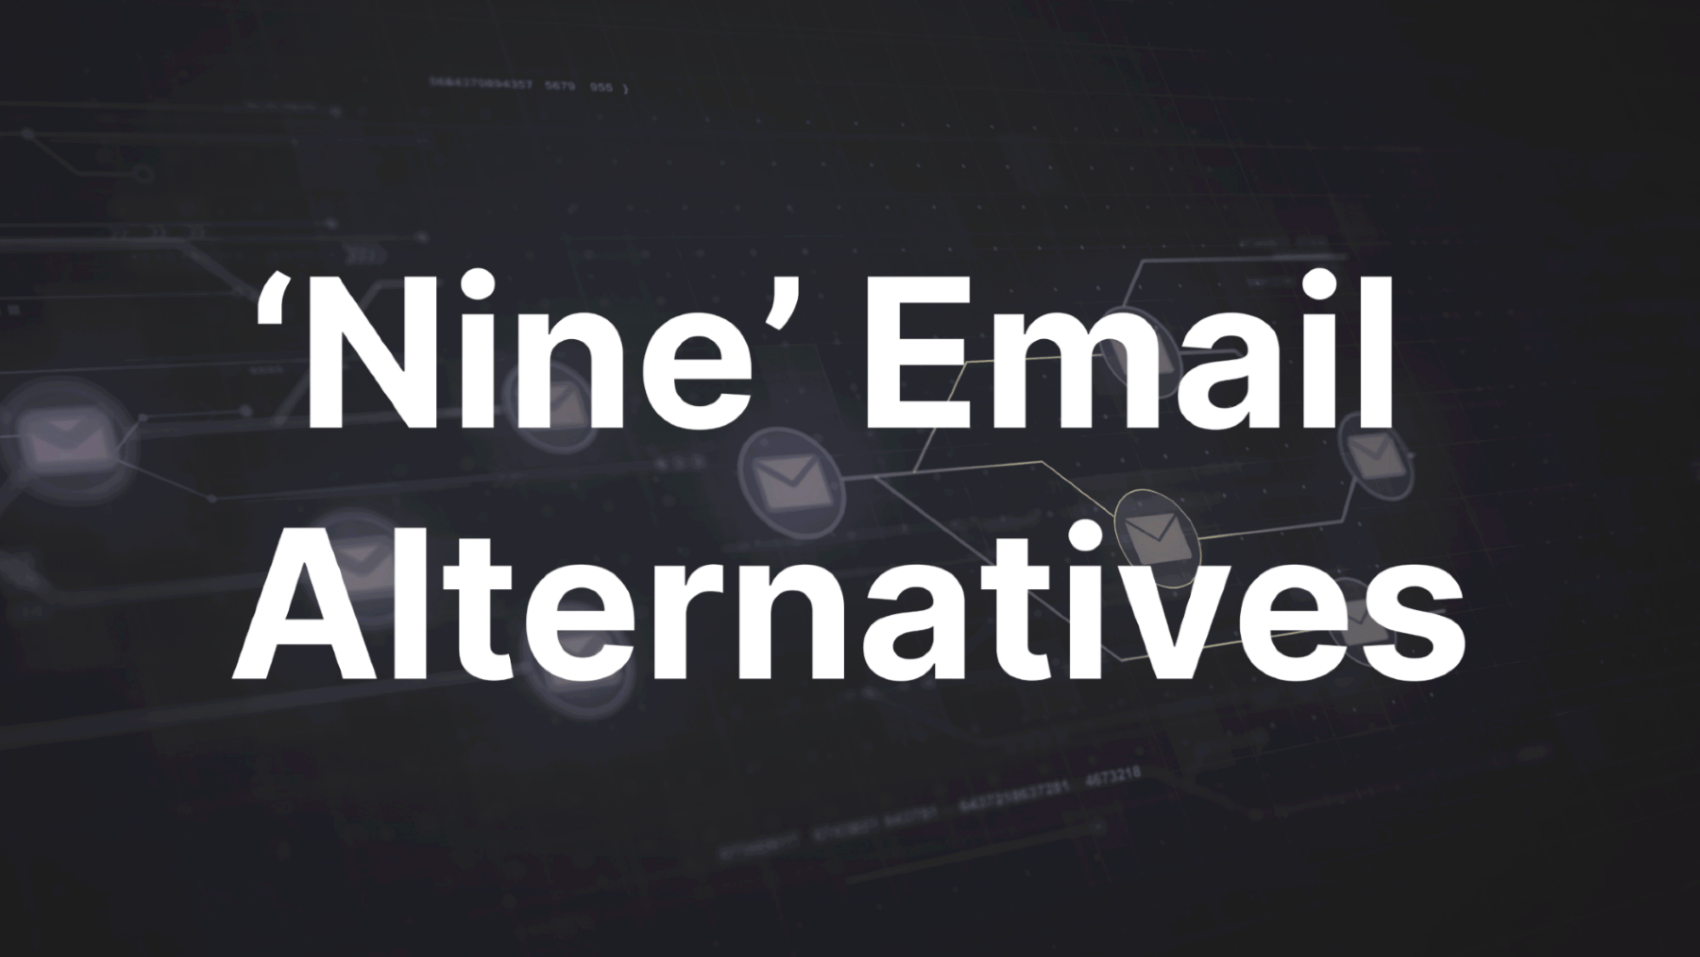 Top 9 Alternatives to Nine Email for Android and iOS